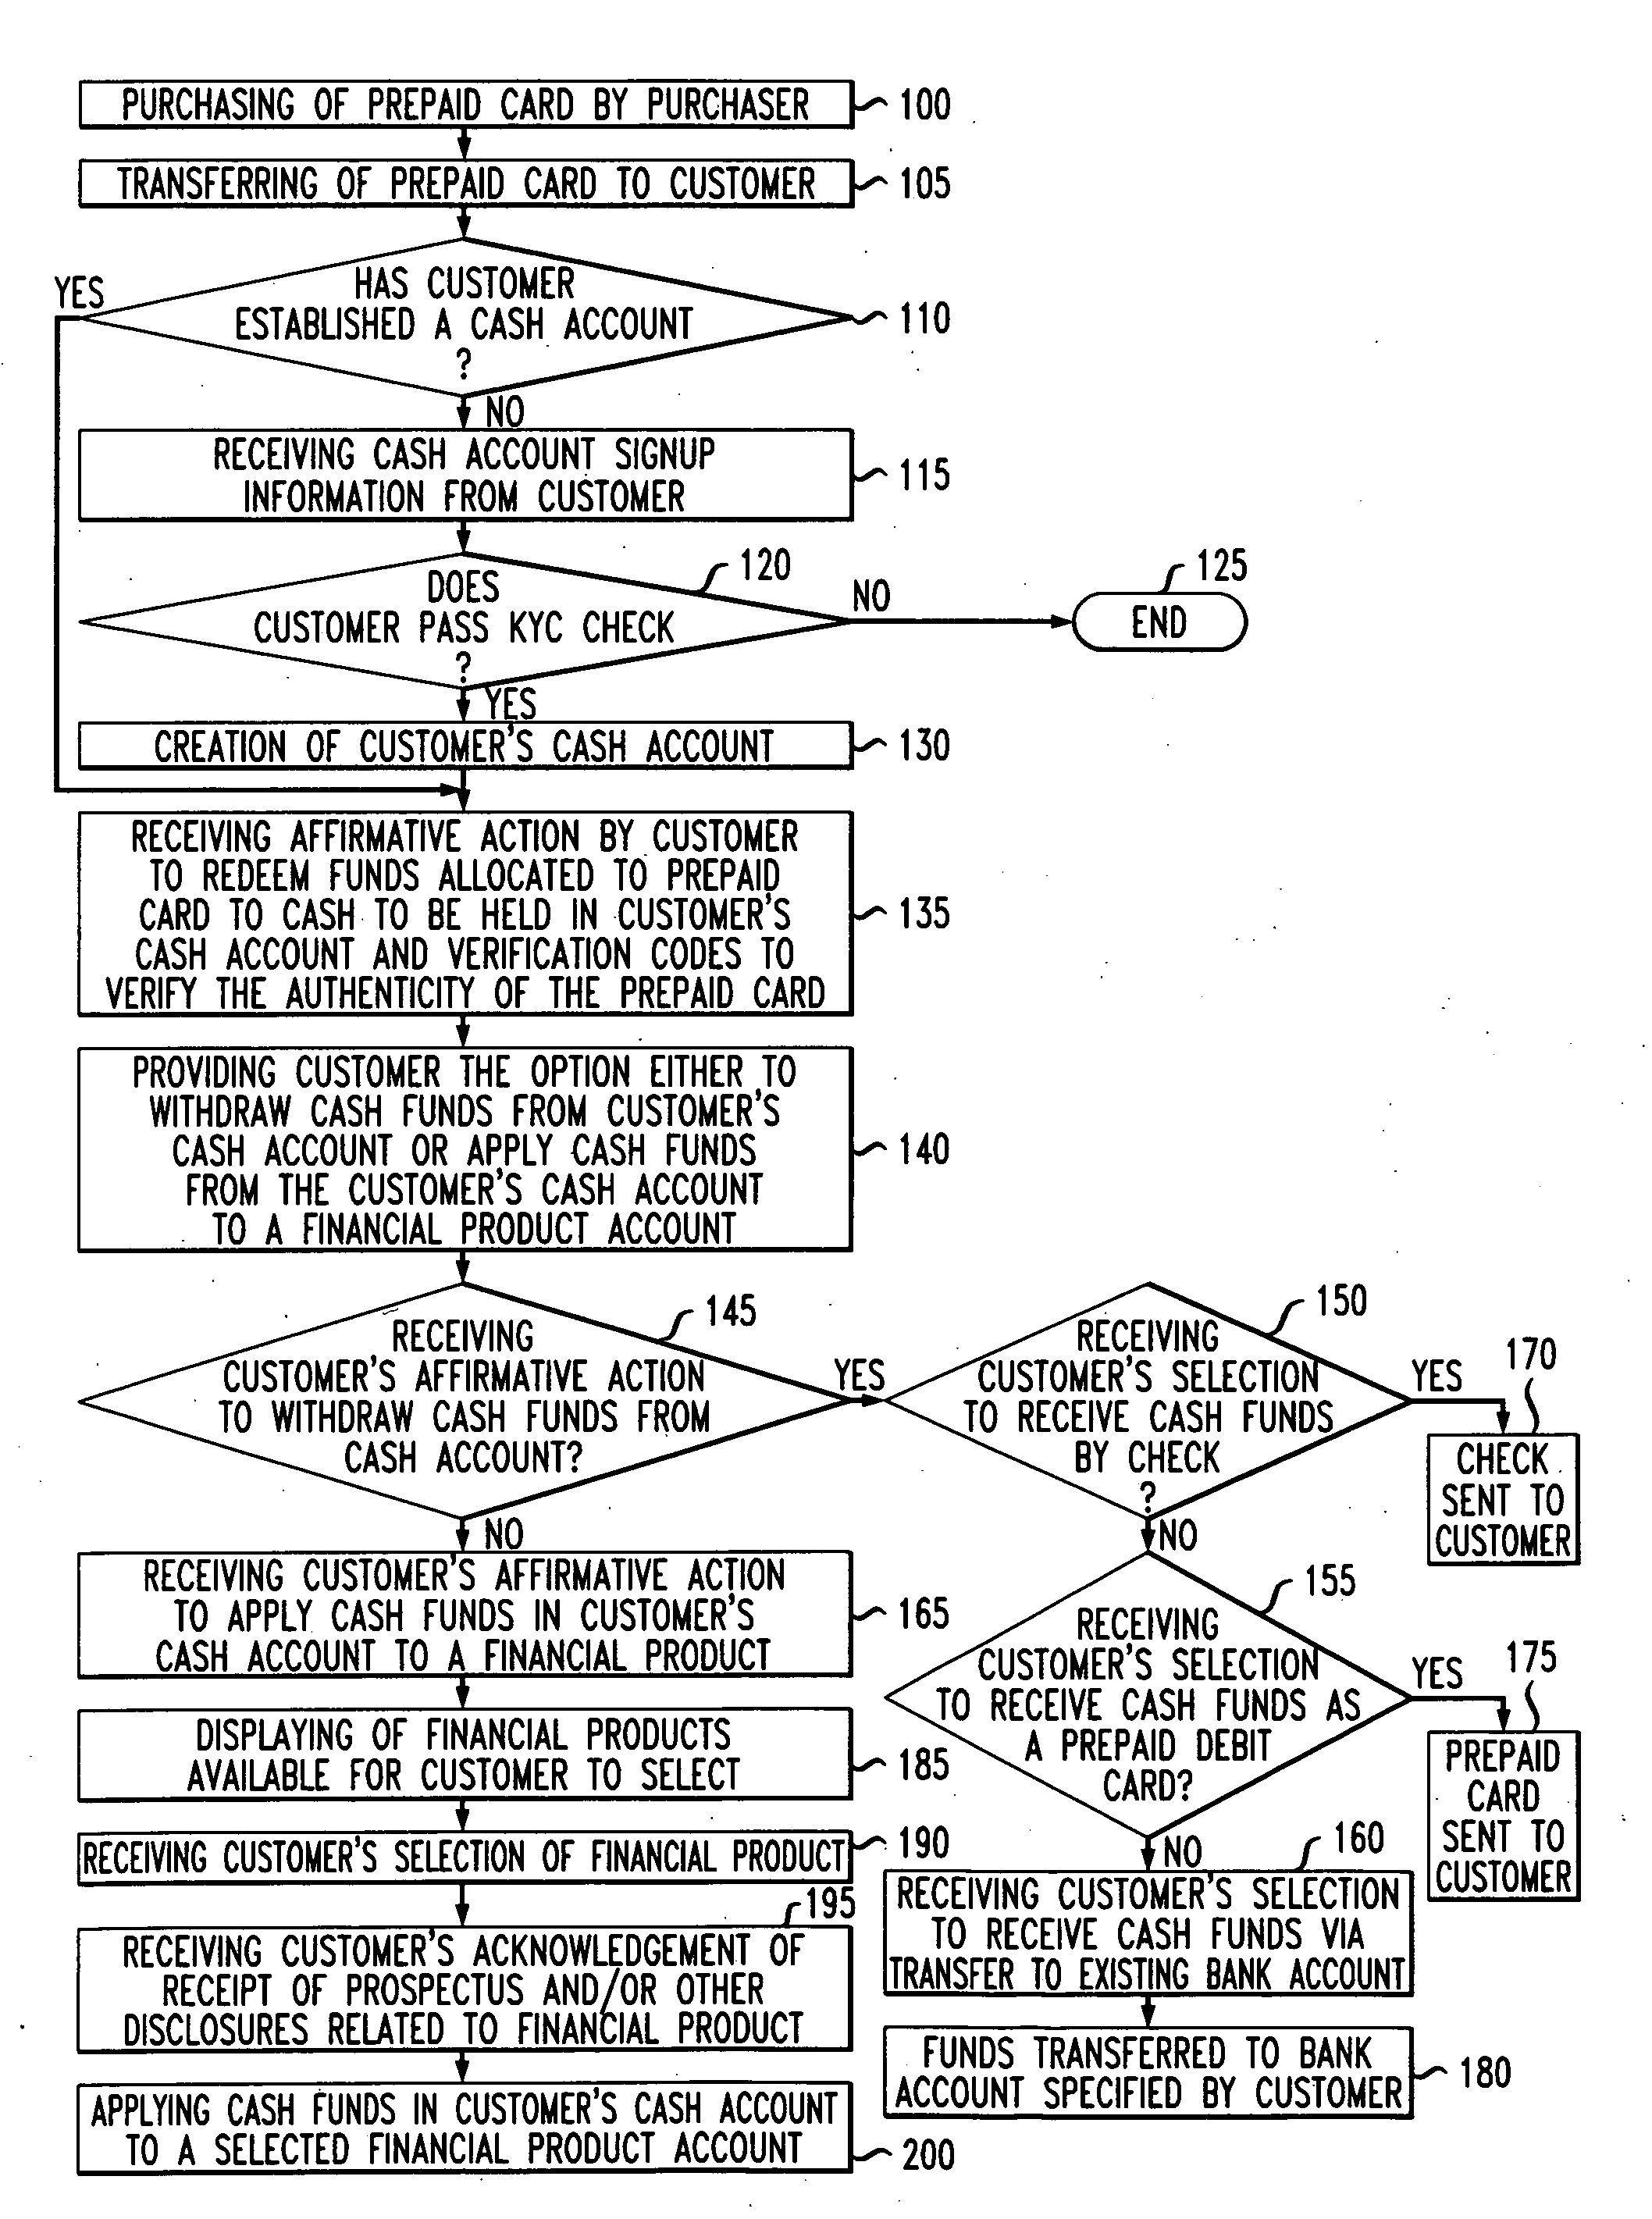 System and method for funding via a prepaid card a financial product intended or targeted by the purchaser at the time of purchase